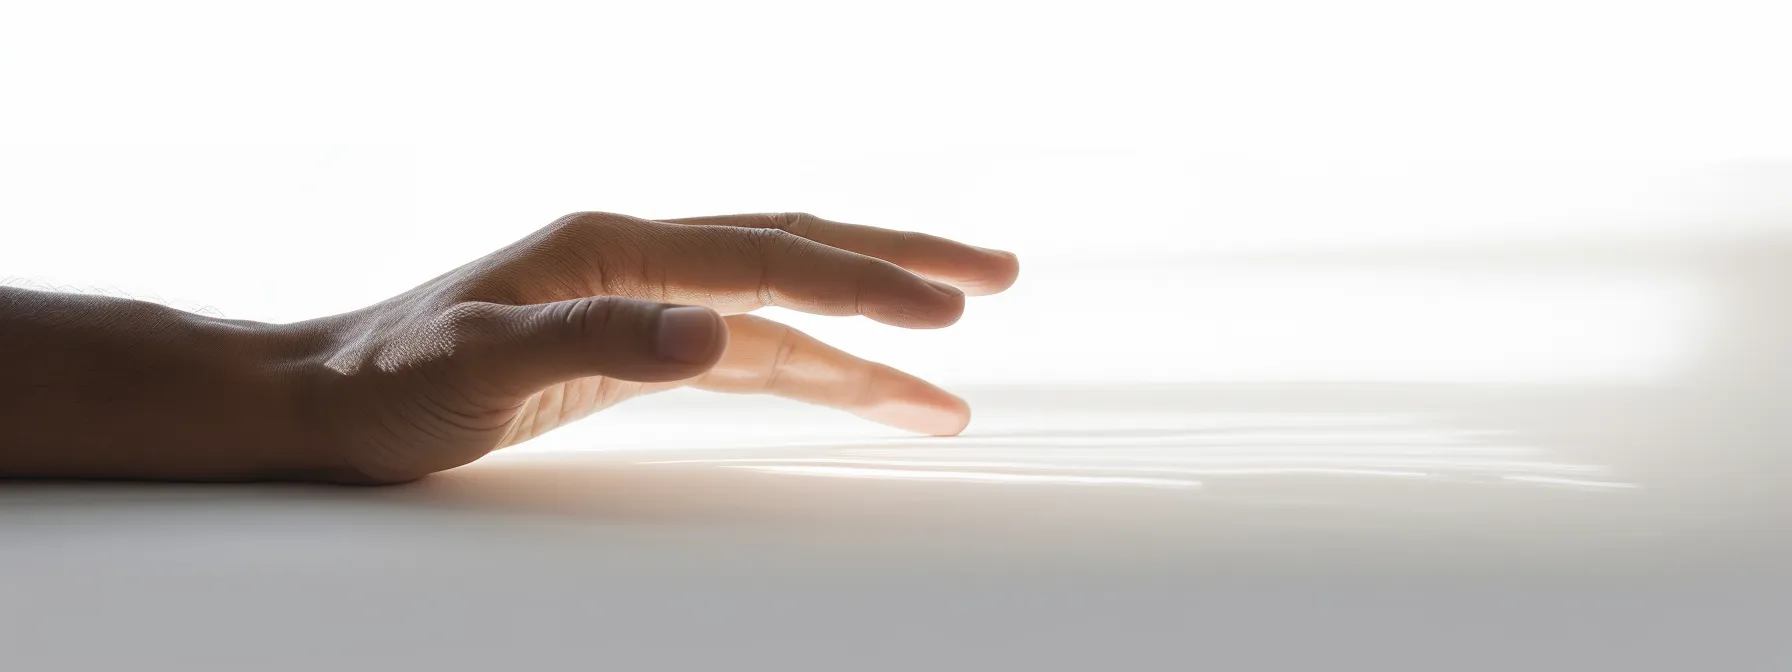 a person's hand glides smoothly across a blank white page, effortlessly connecting one thought to the next with an array of transition words.